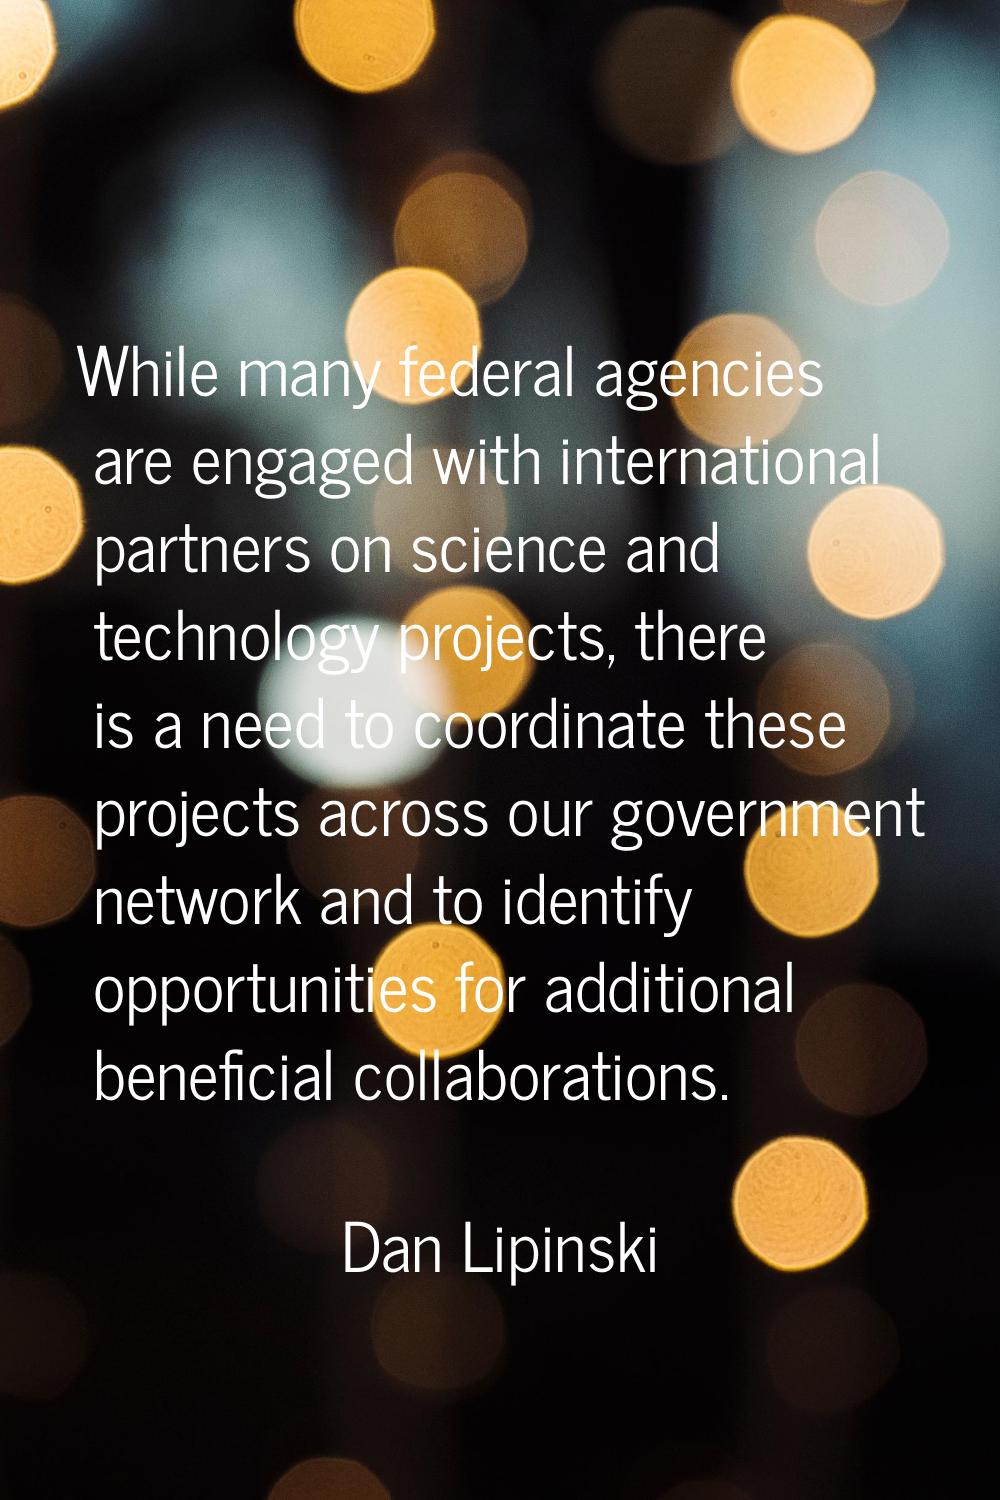 While many federal agencies are engaged with international partners on science and technology proje